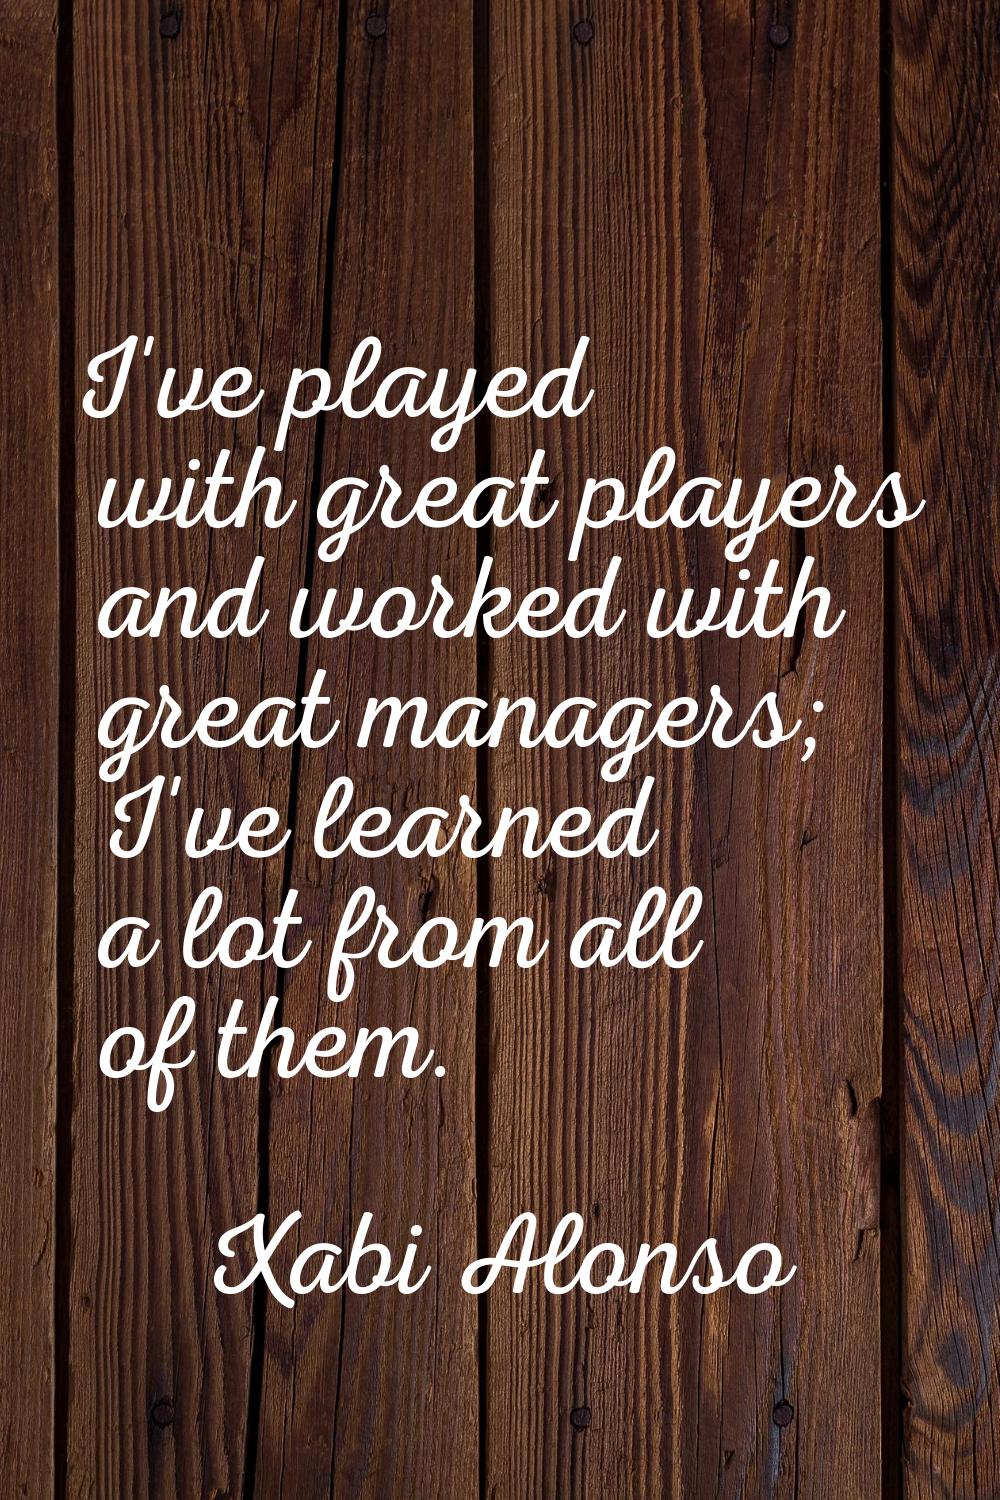 I've played with great players and worked with great managers; I've learned a lot from all of them.